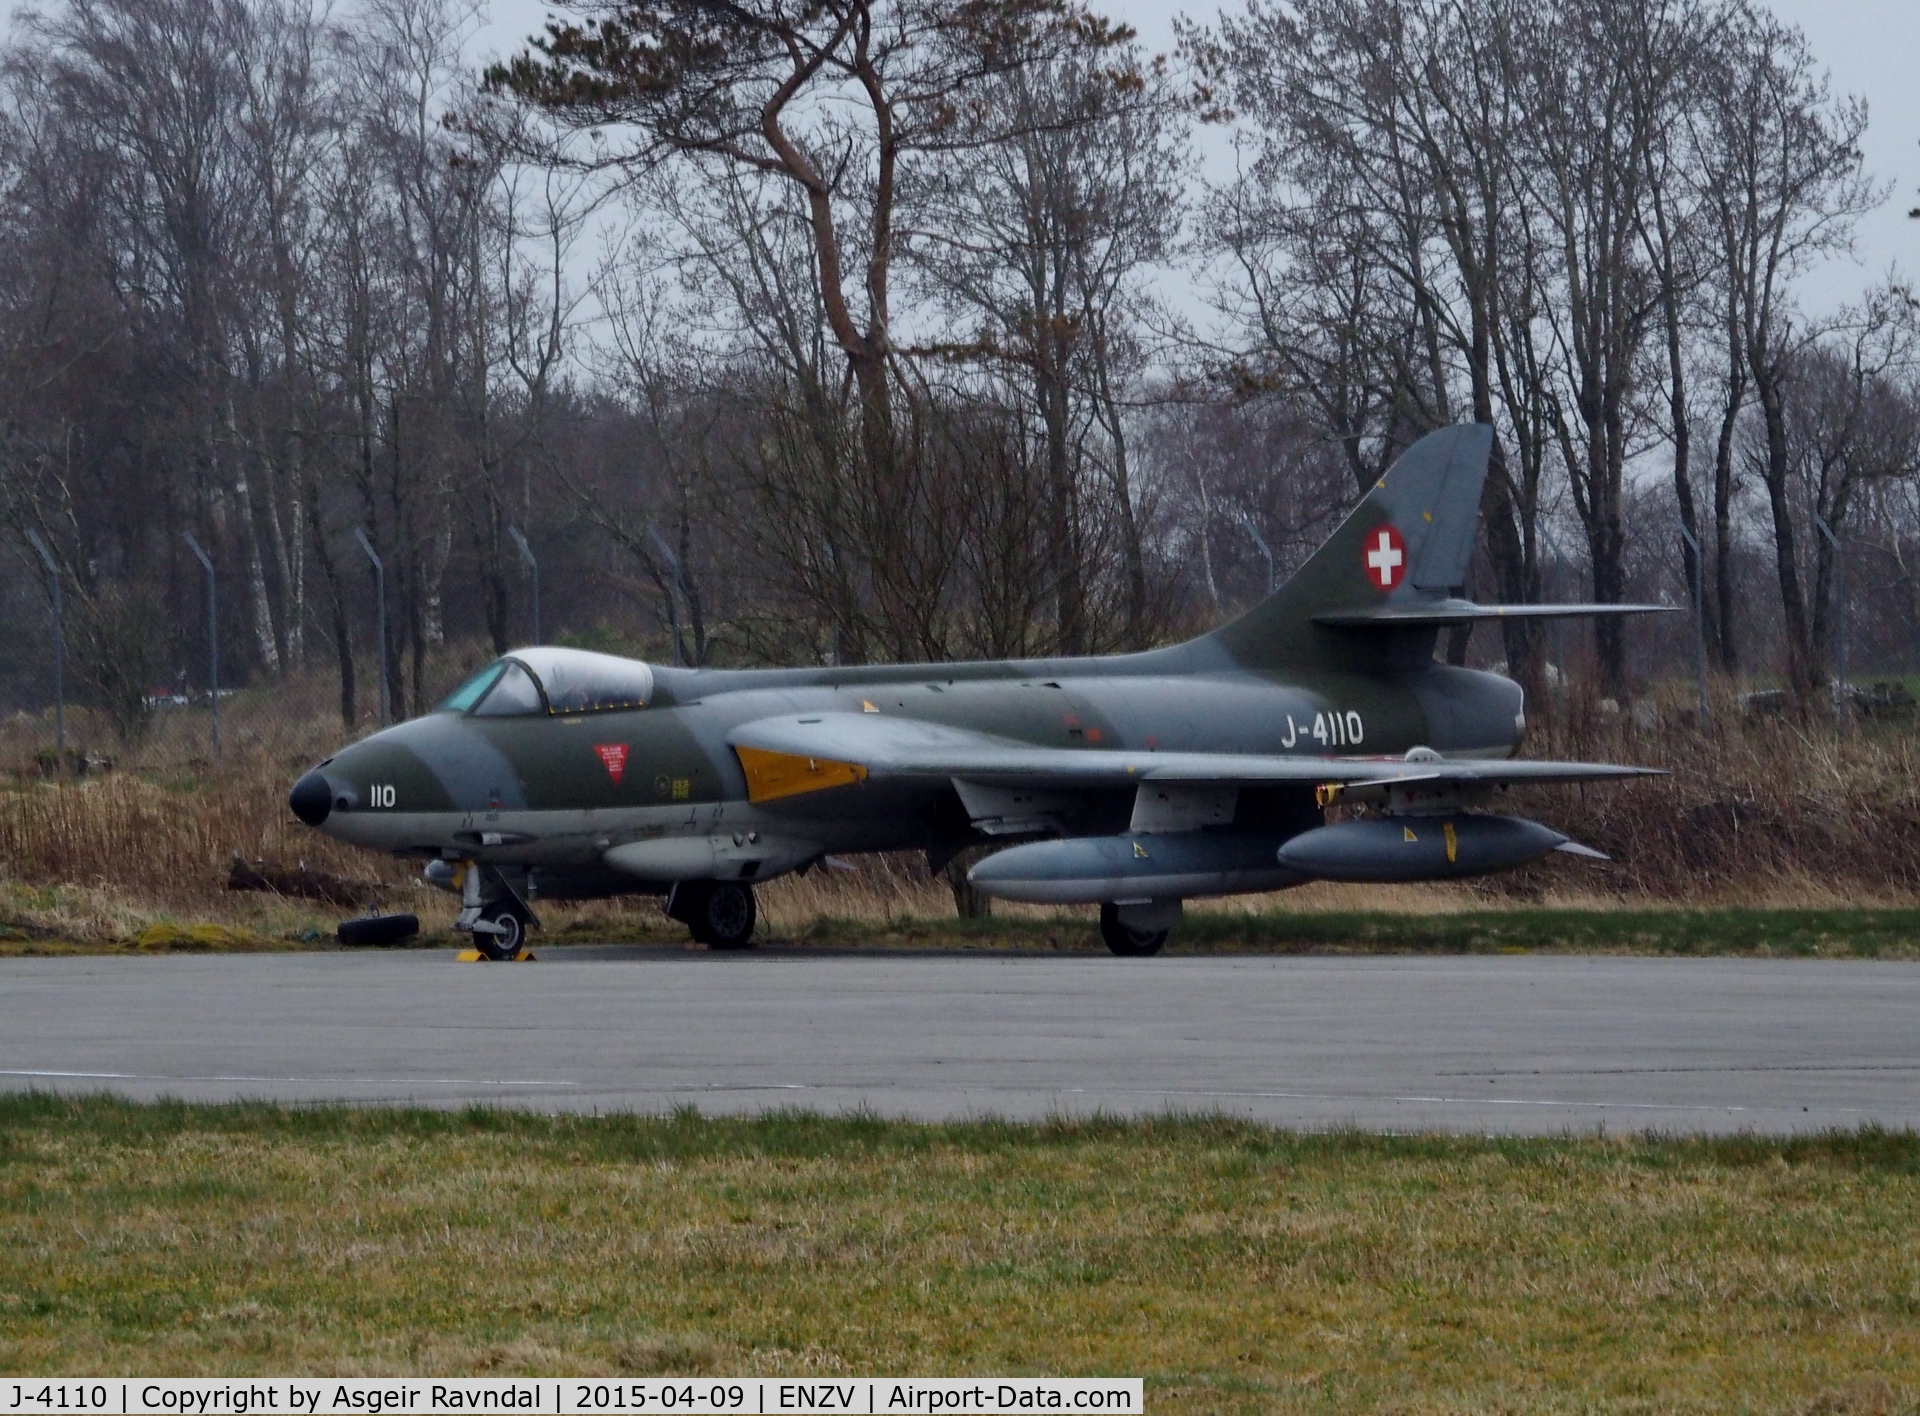 J-4110, 1972 Hawker Hunter F.58A C/N HABL-003079, Photo at Stavanger Airport Sola, Norway